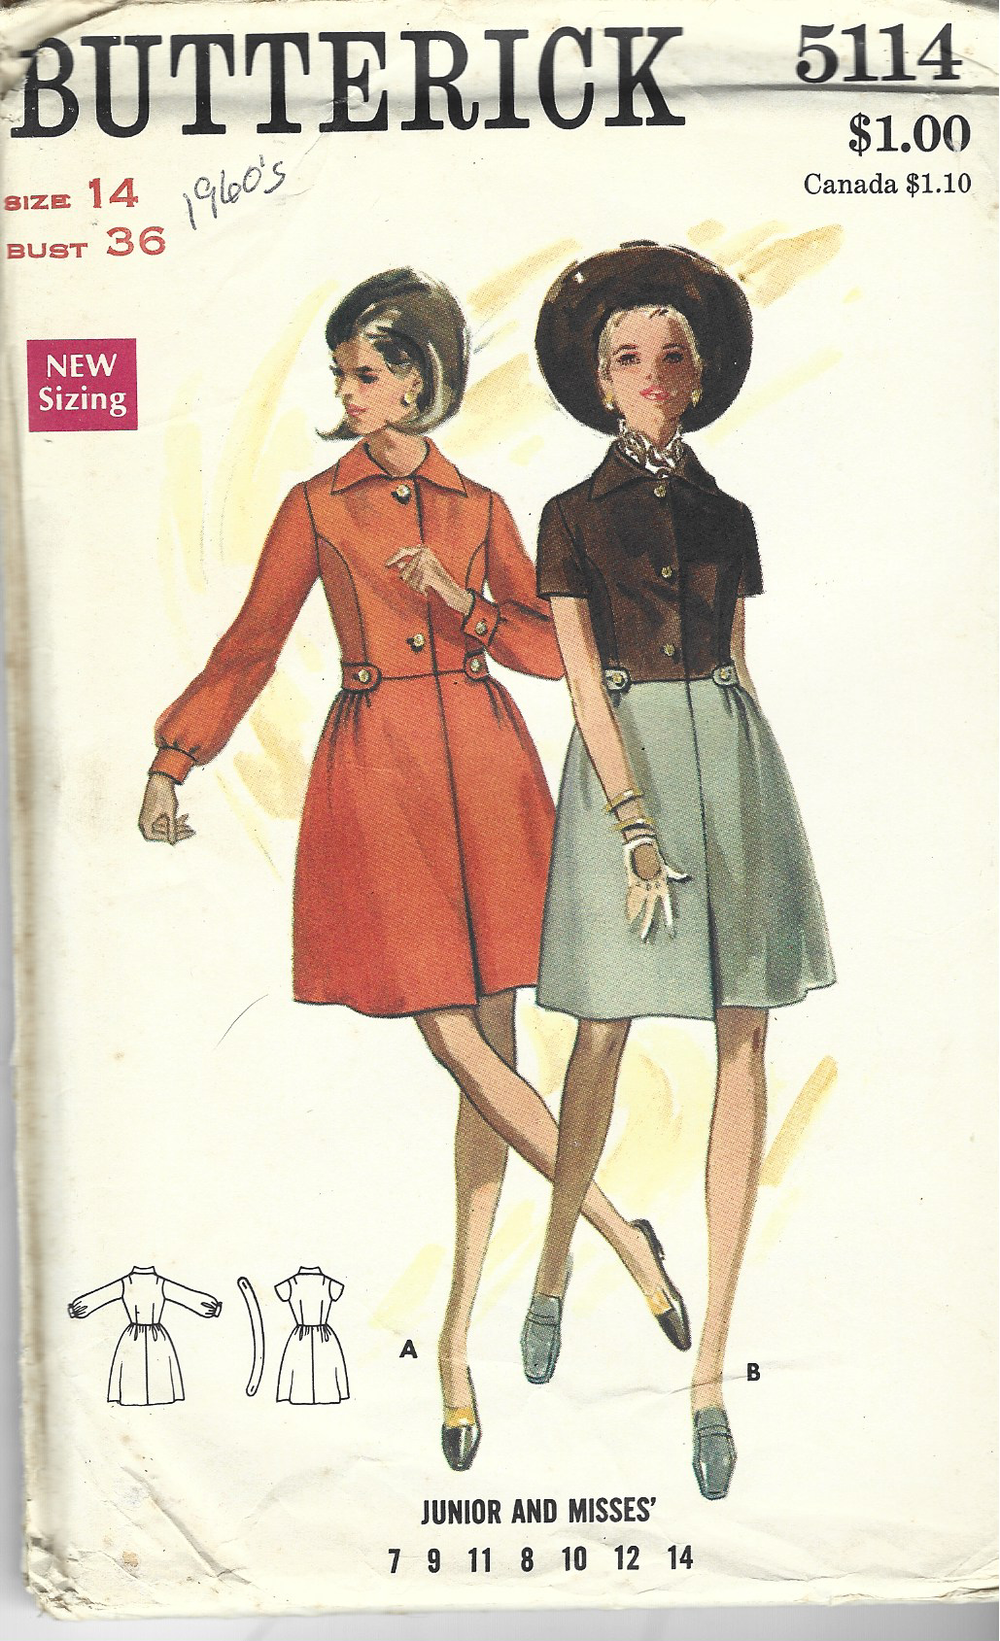 Butterick 5114 Ladies One Piece Dress Vintage Sewing Pattern 1960s